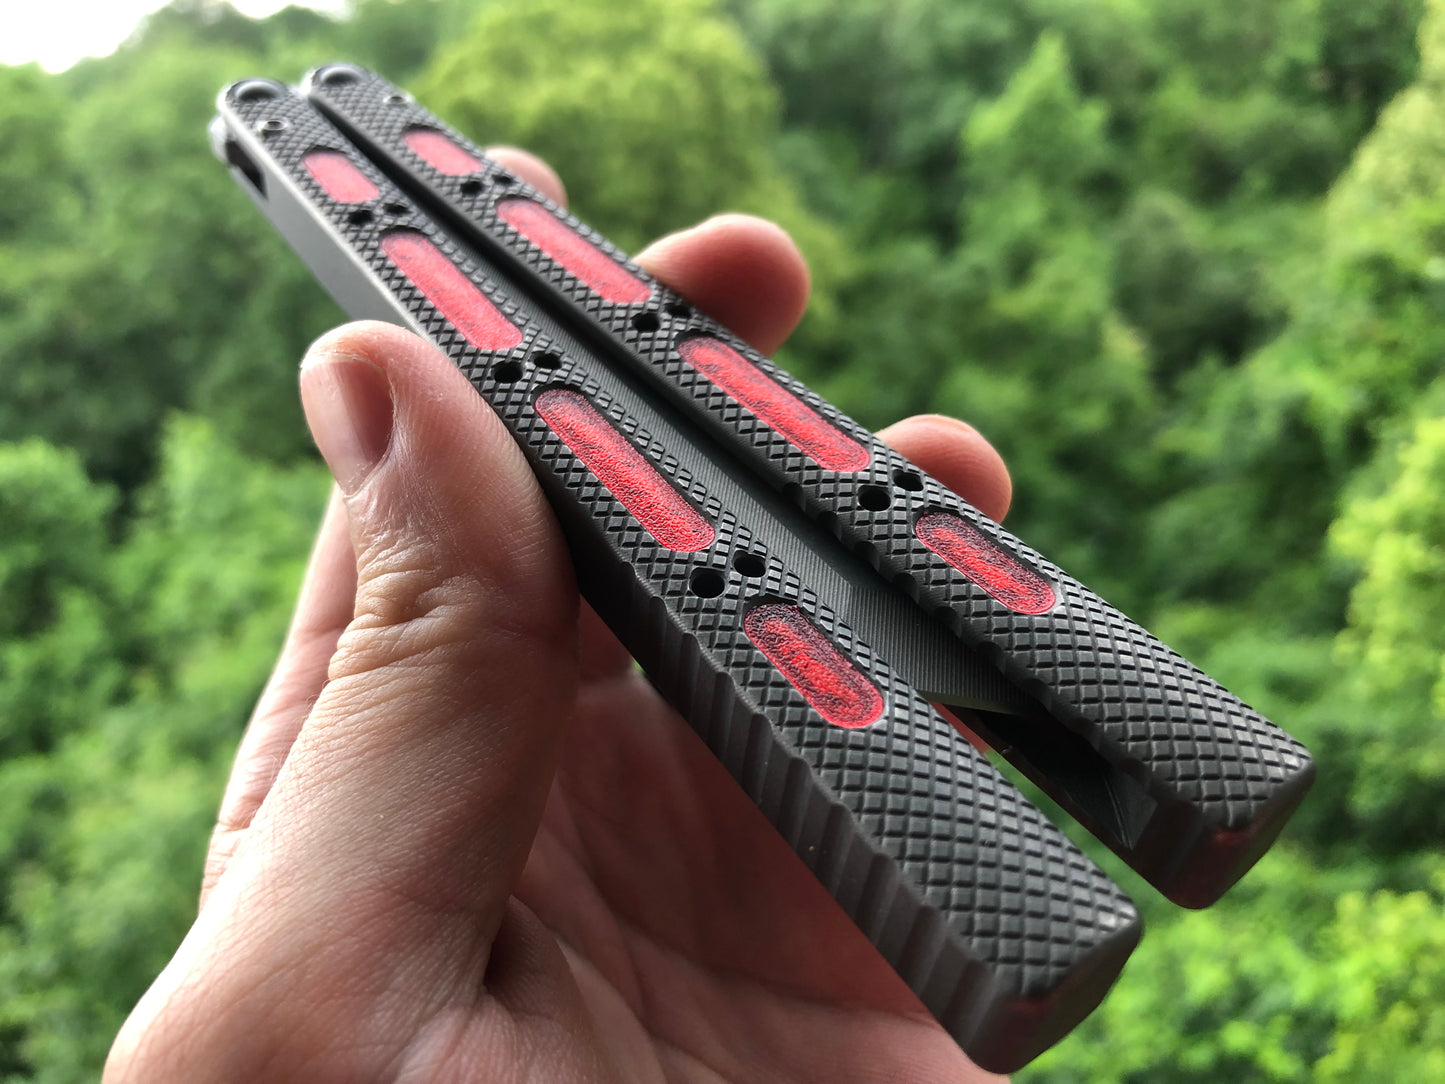 Modify the grip of your NRB Concepts SLight balisong and NRB UltraLight balisong trainer with Zippy handle inlays.